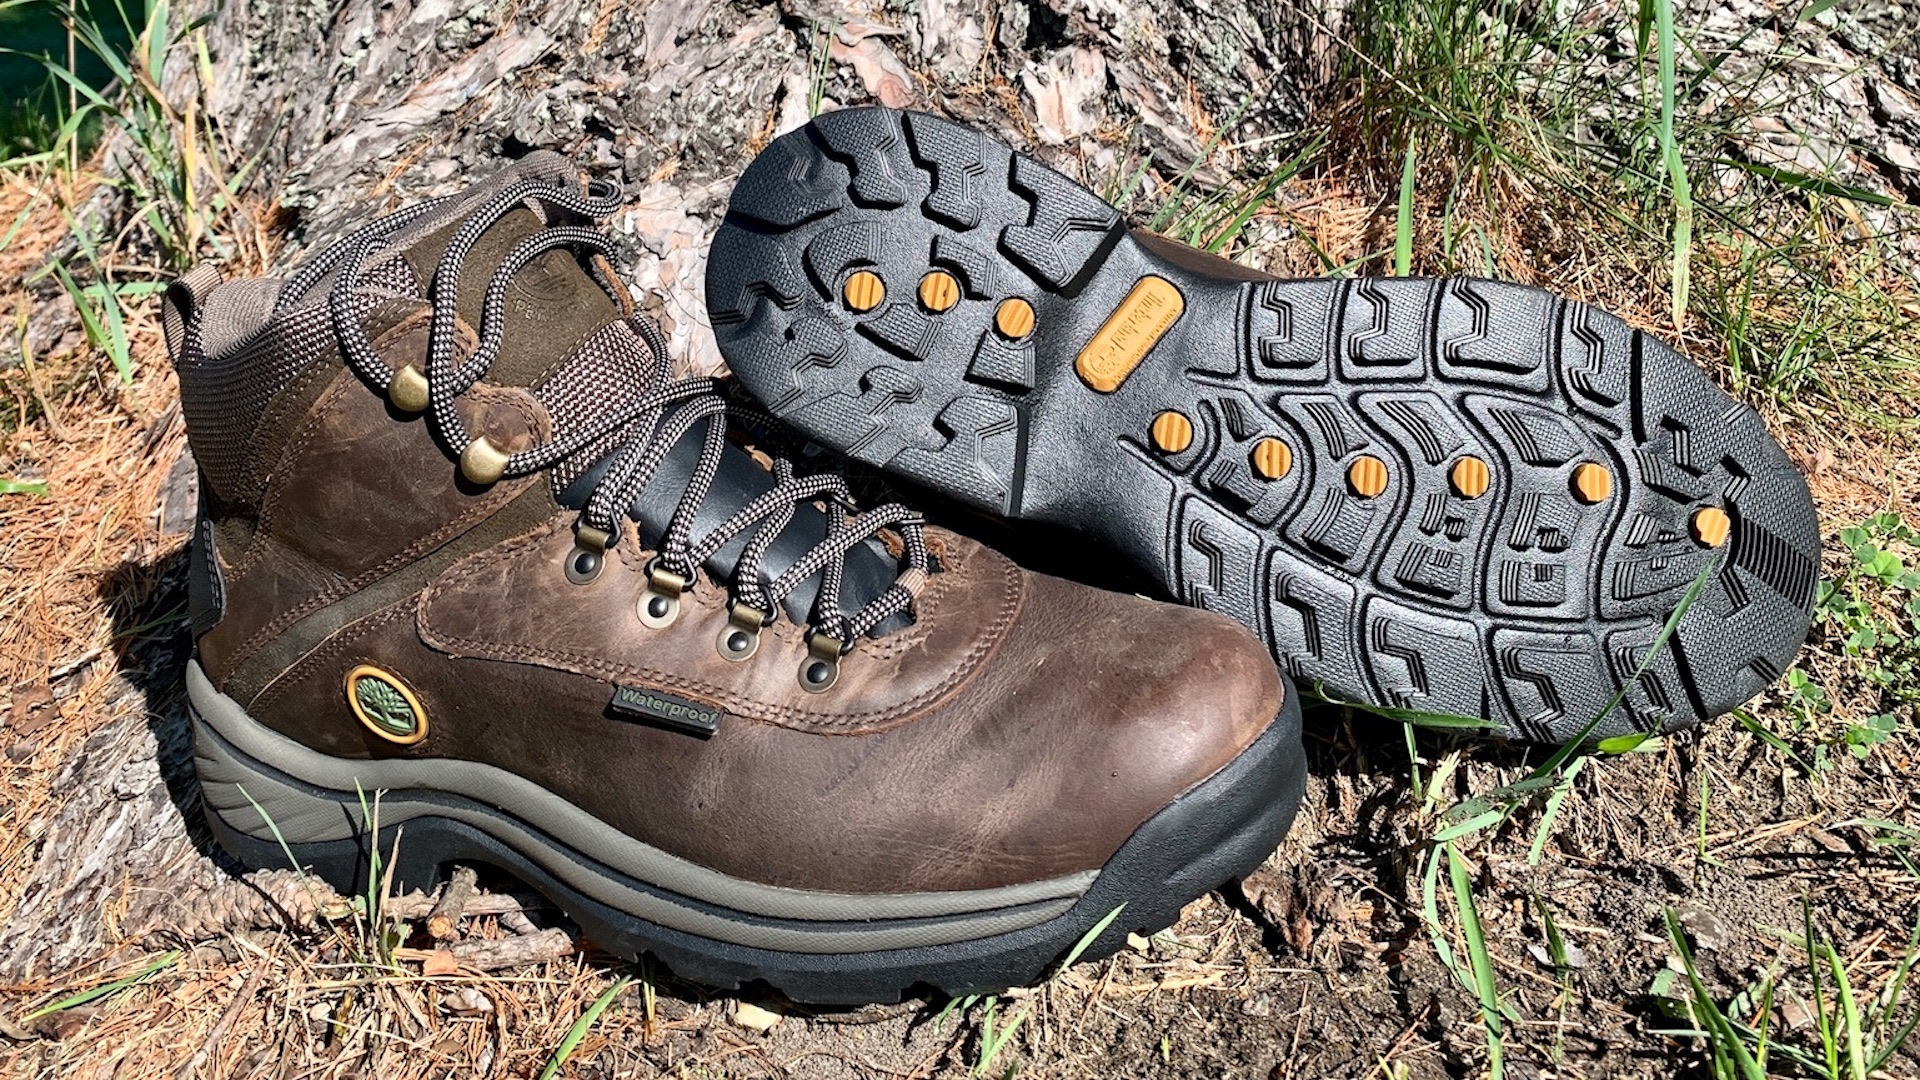 Timberland Mid Waterproof Hiking Boots (Review) 2021 - Task & Purpose